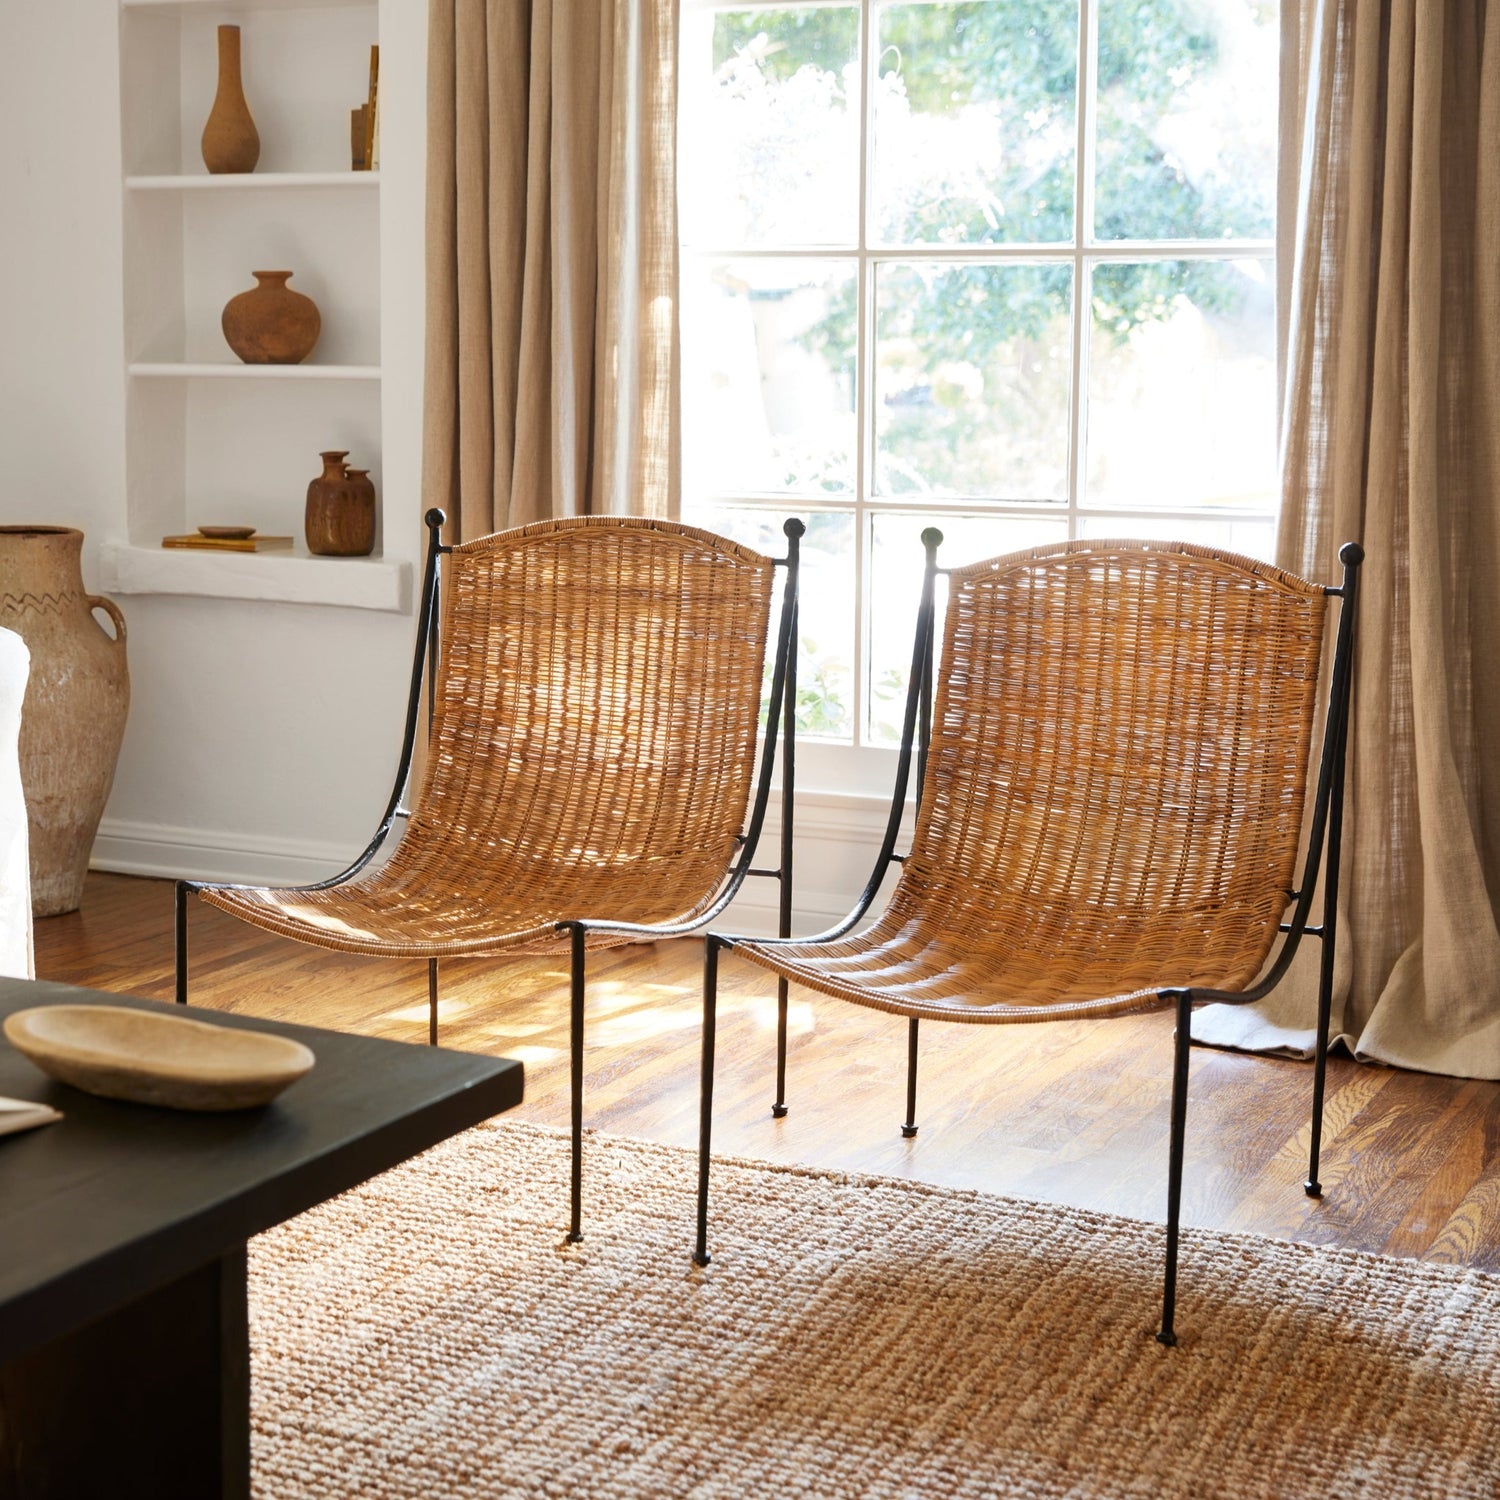 lacoste wicker lounge chairs in living room